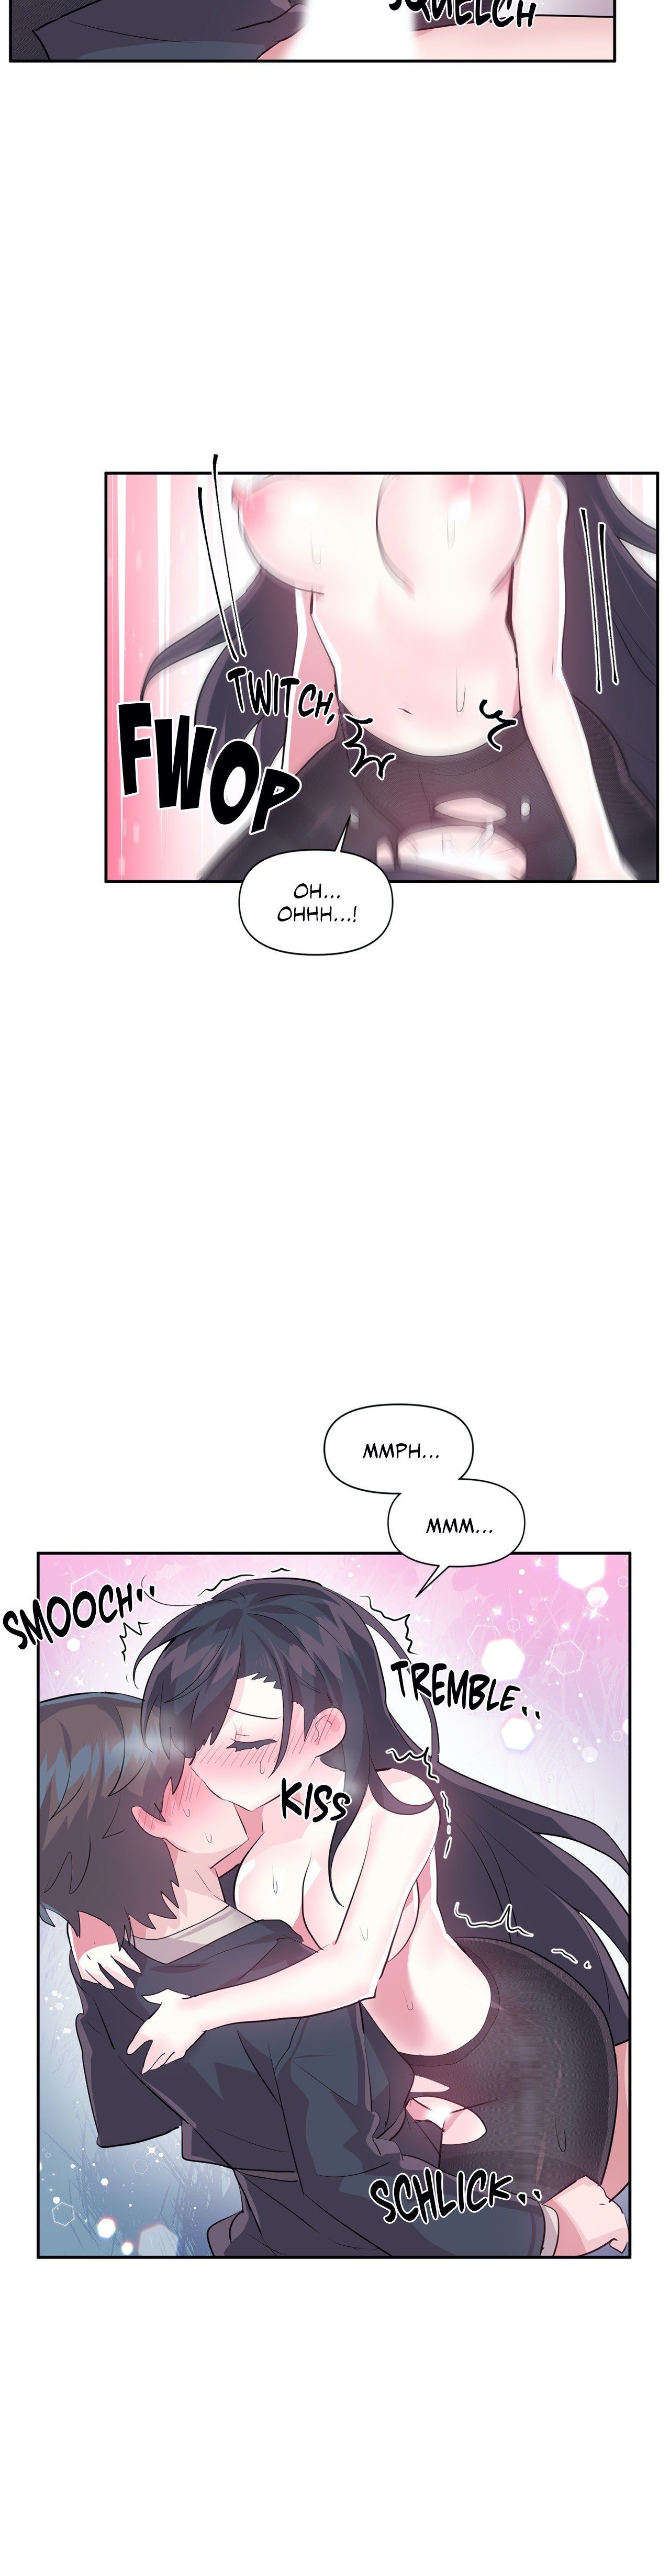 log-in-to-lust-a-land-chap-35-24